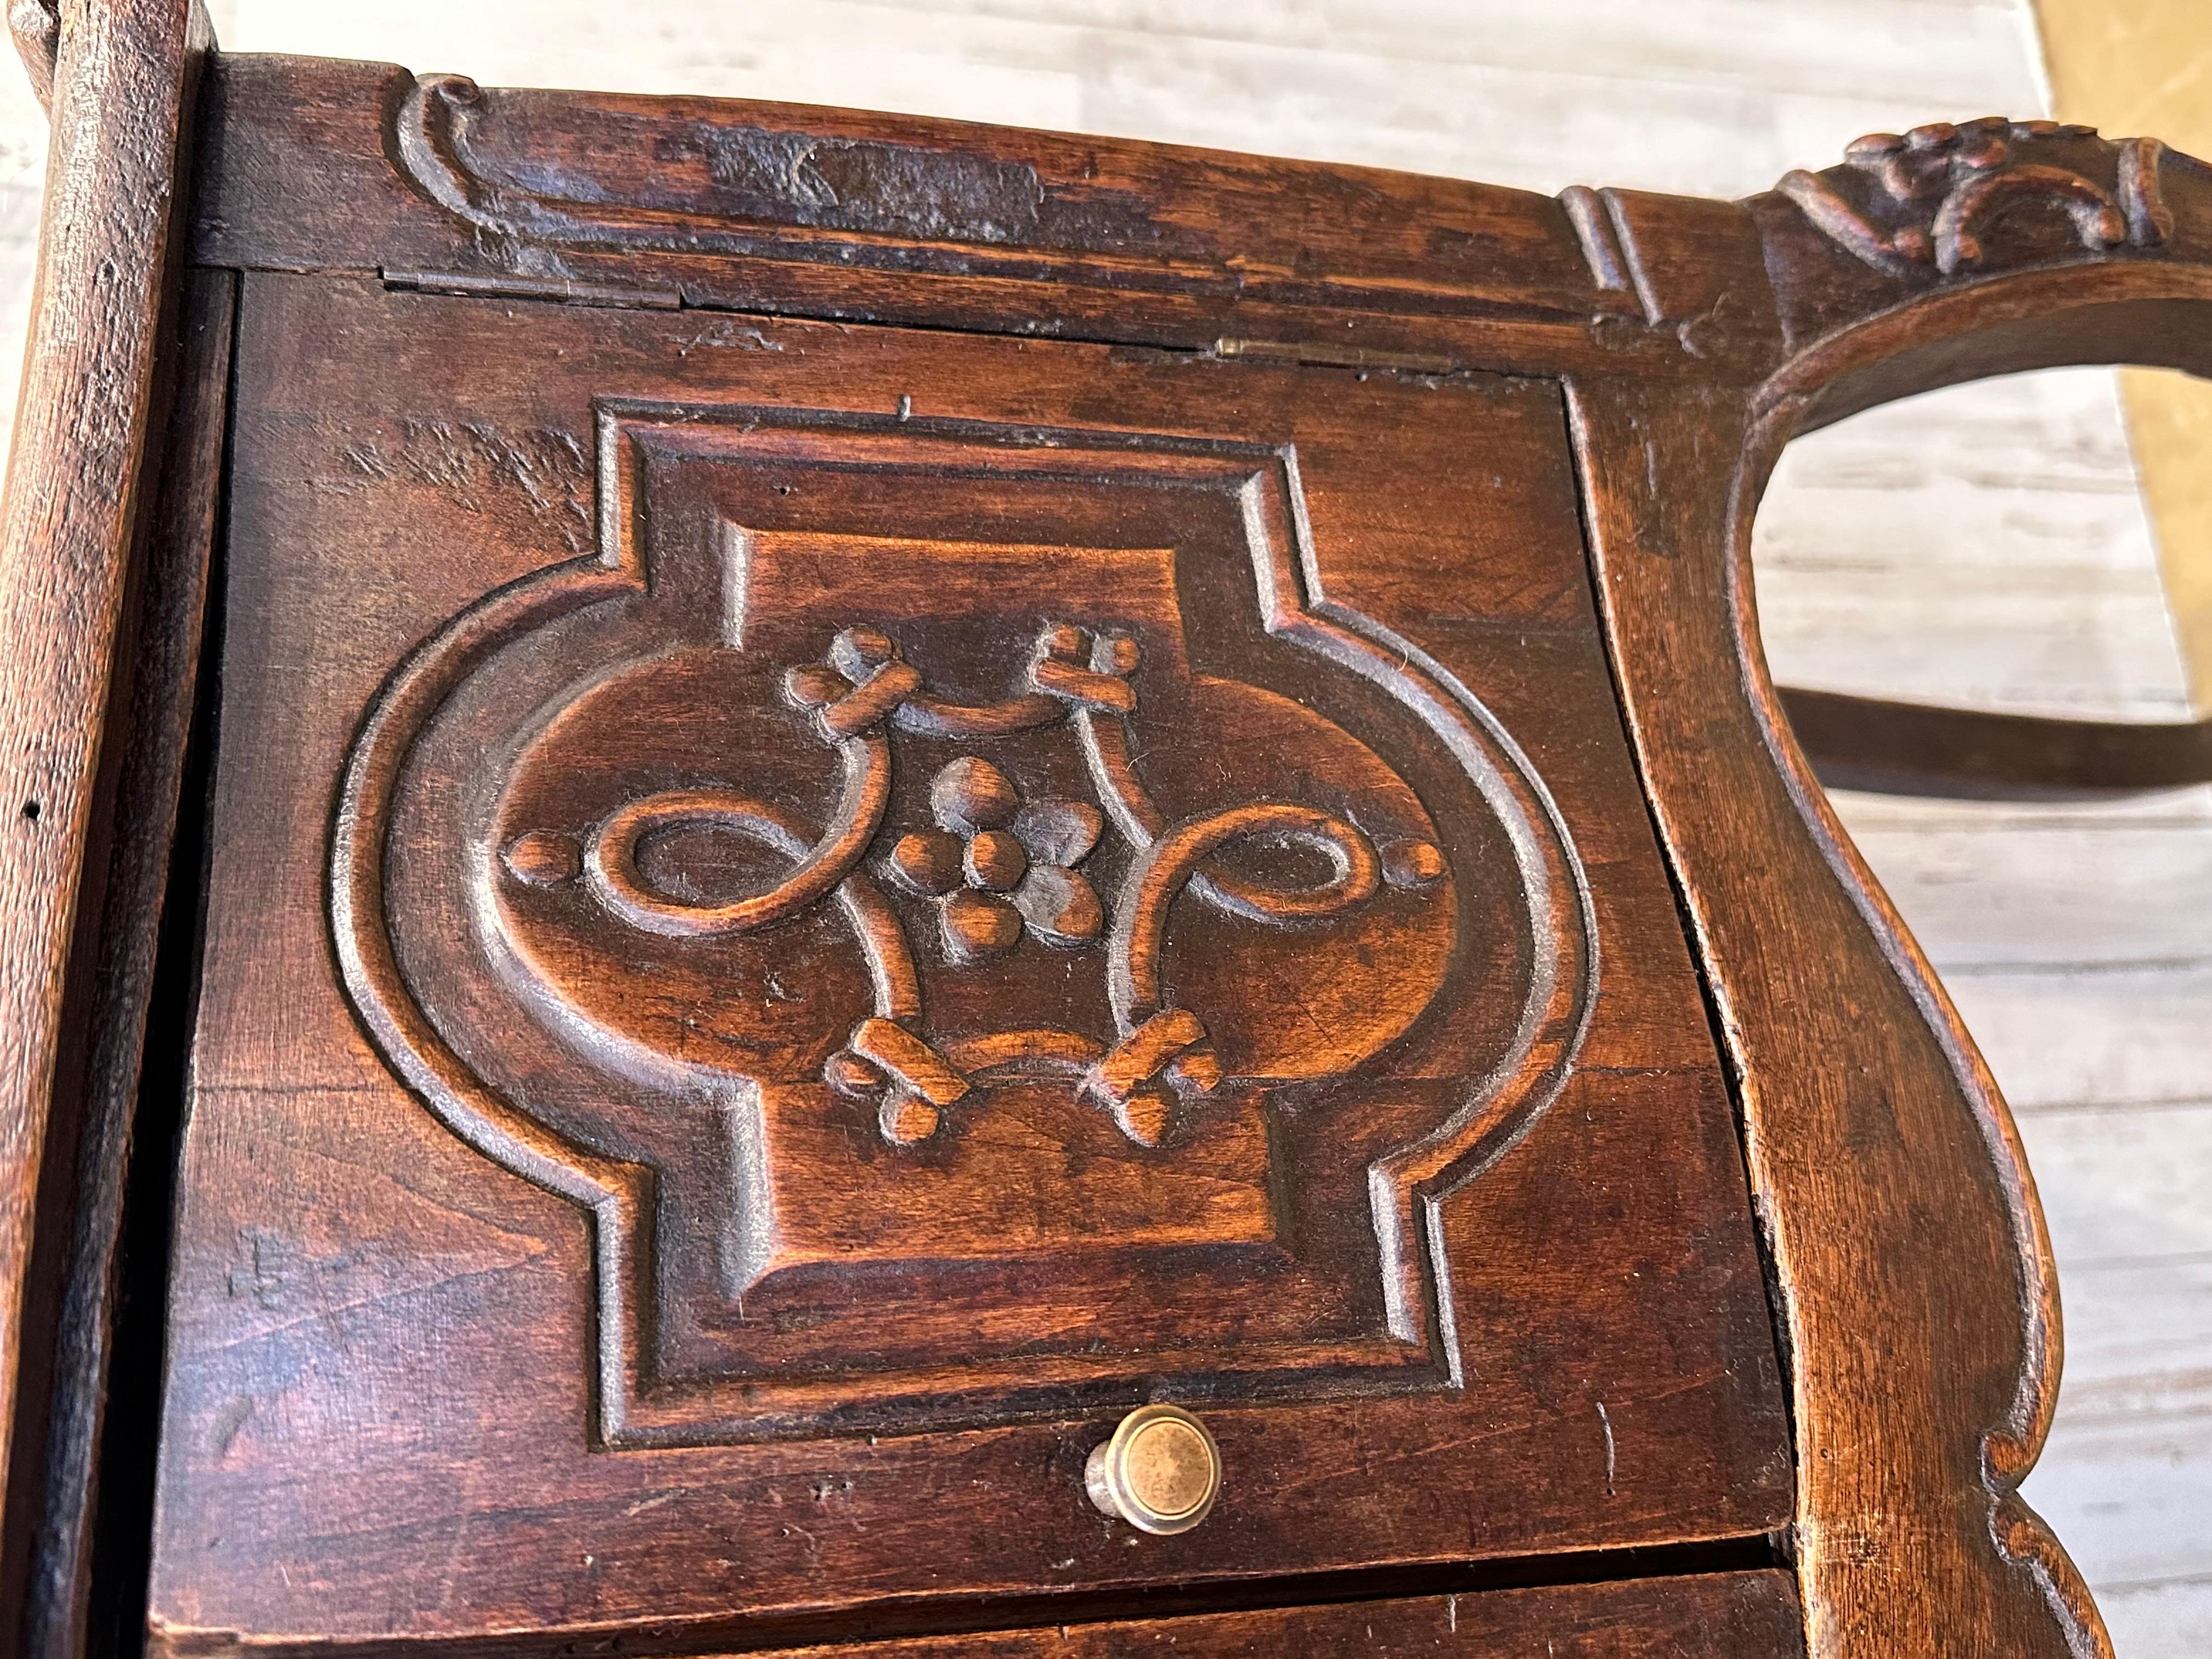 This could be one of the most unusual tables I've ever come across probably a marriage Table that was presented to the couple at their marriage. The bow at the top represents the union of marriage. The age of this is probably around 1820 yeah. When